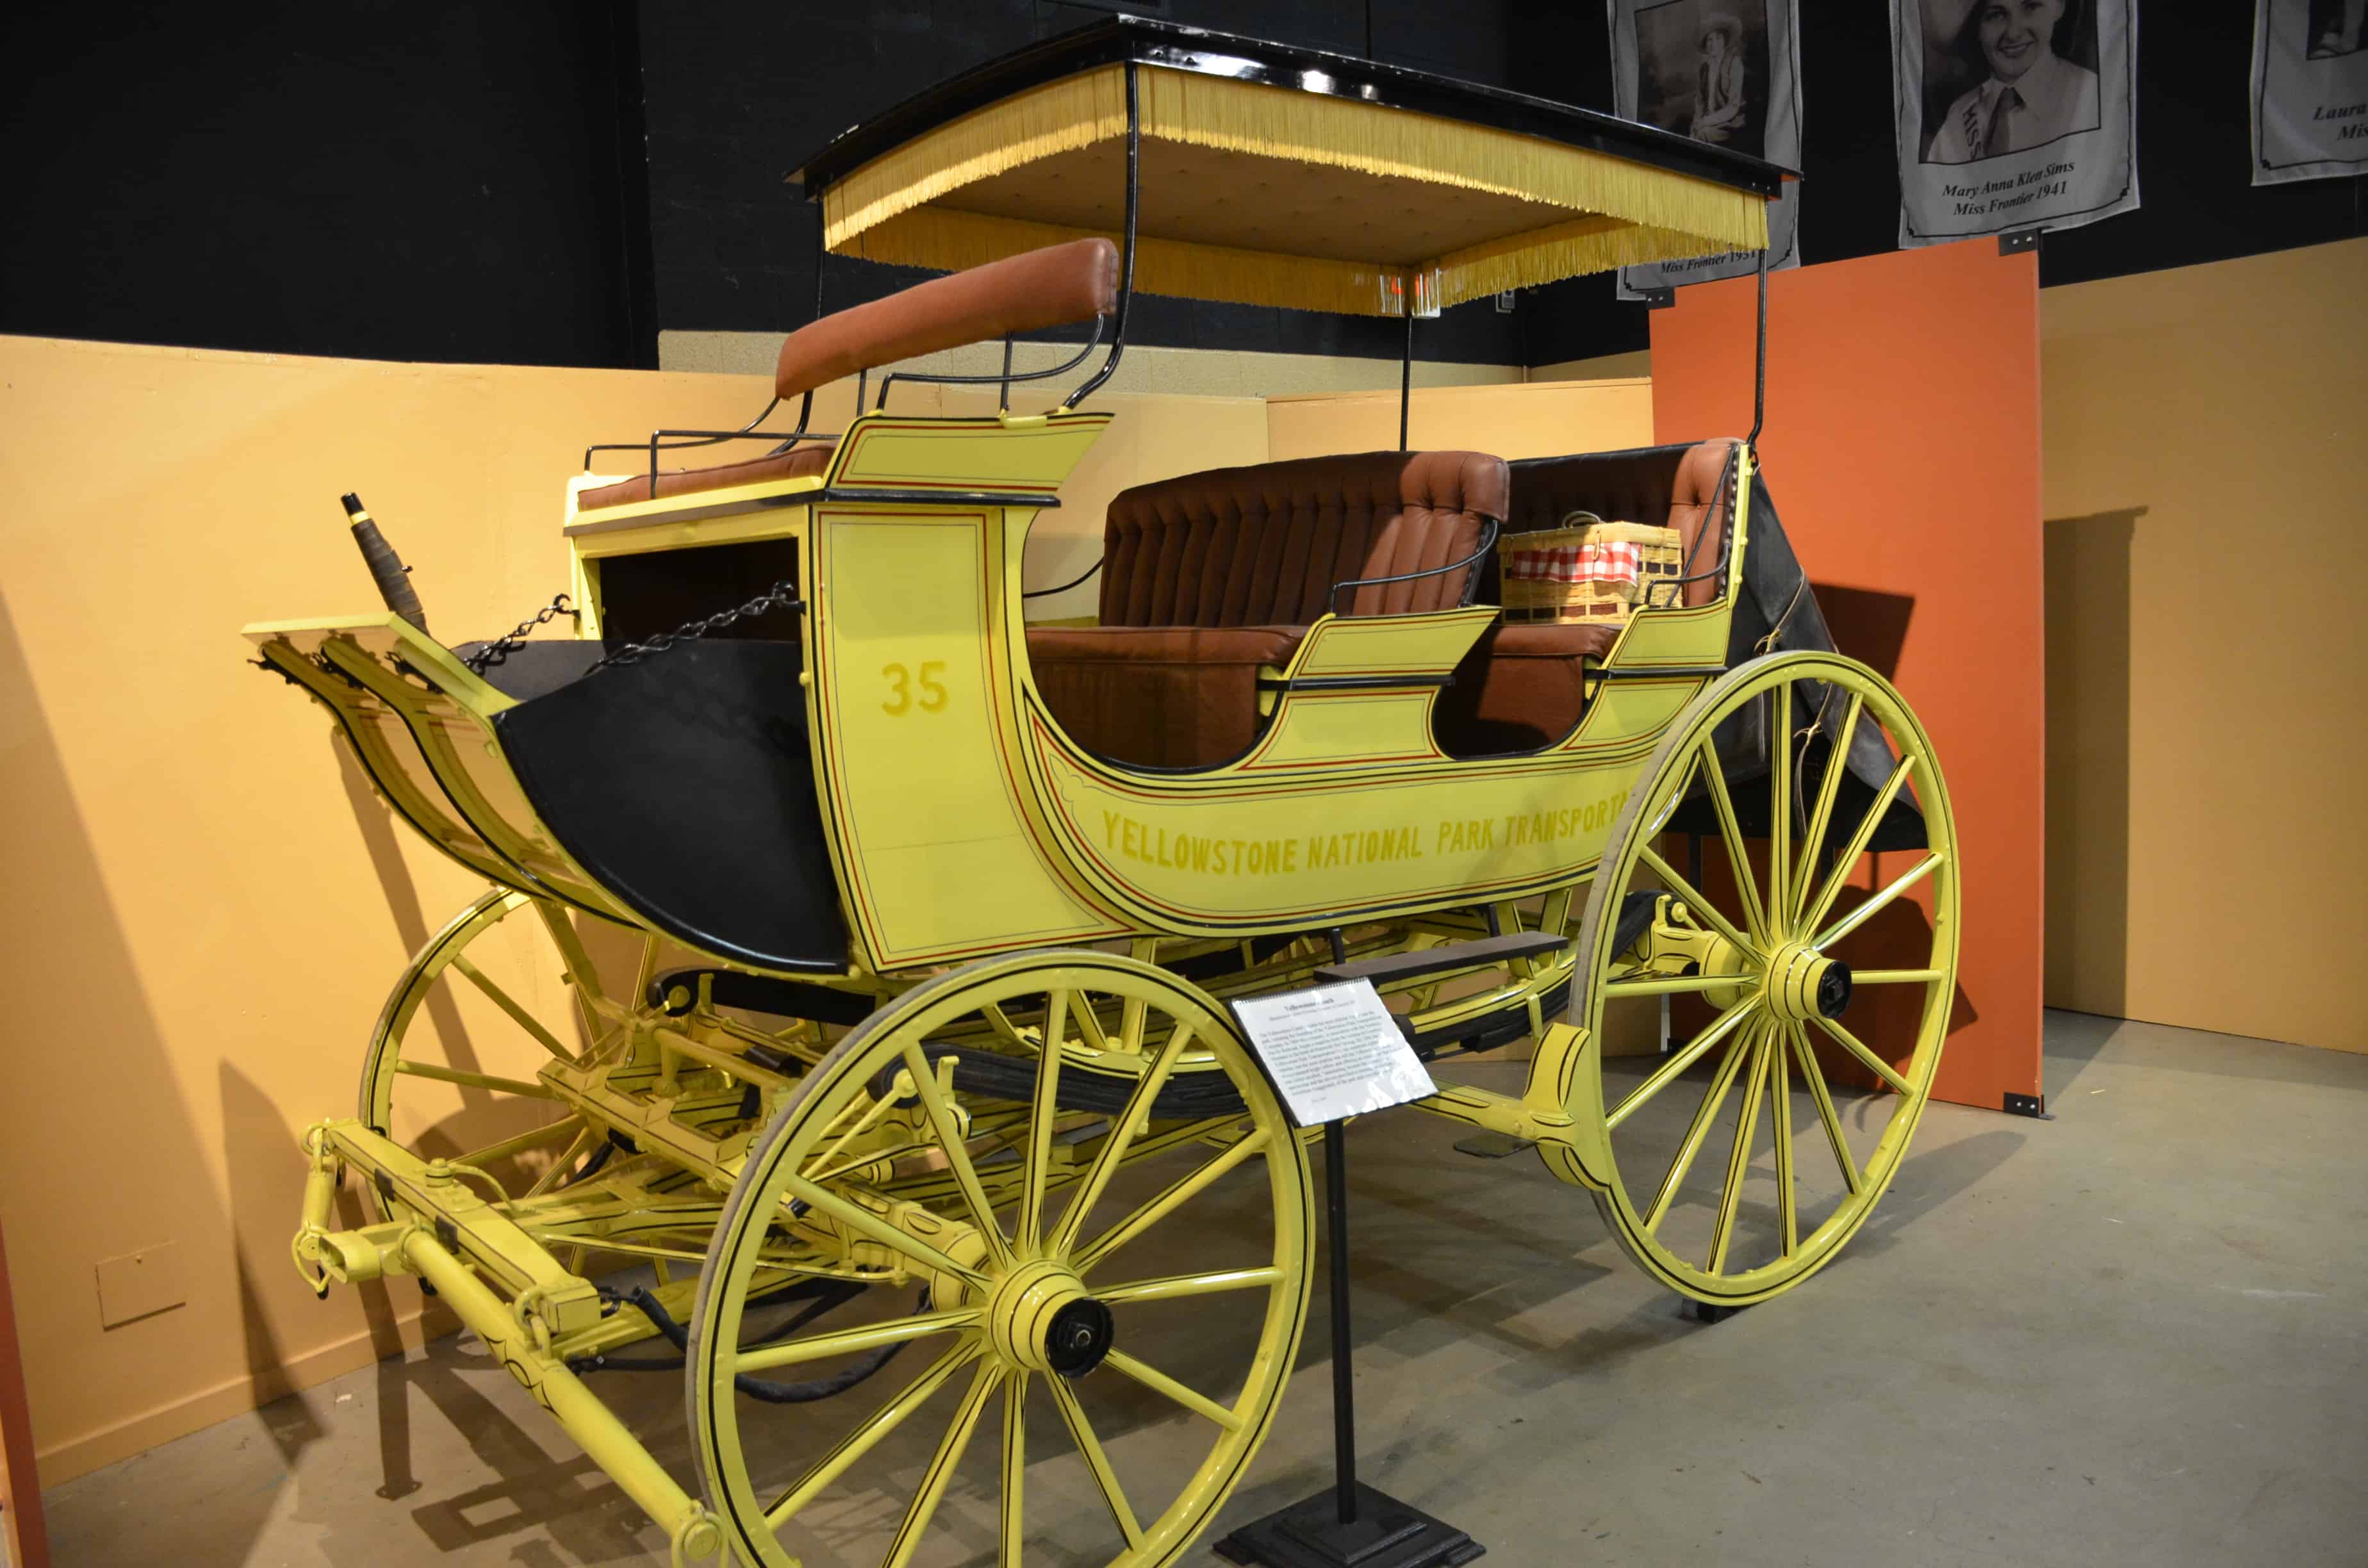 Yellowstone National Park tourist carriage at the Cheyenne Frontier Days Old West Museum in Wyoming